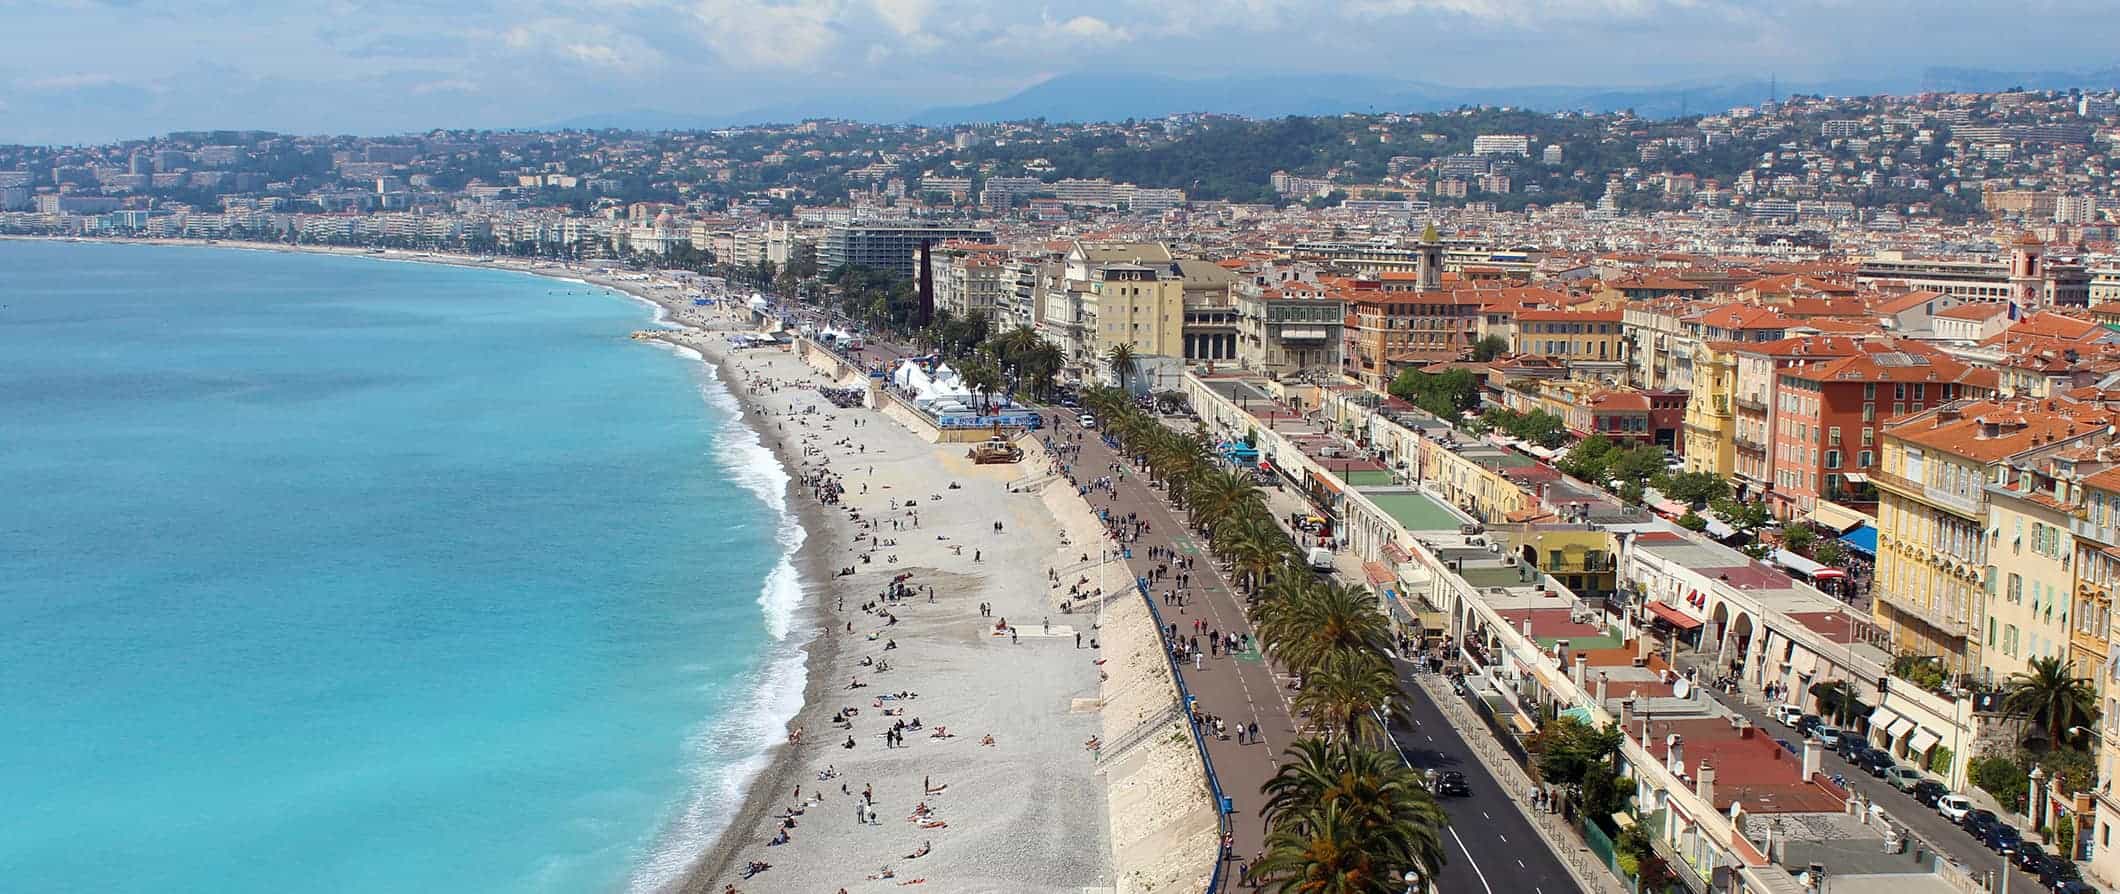 A gorgeous aerial view overlooking Nice and its beach and promenade along the French coast